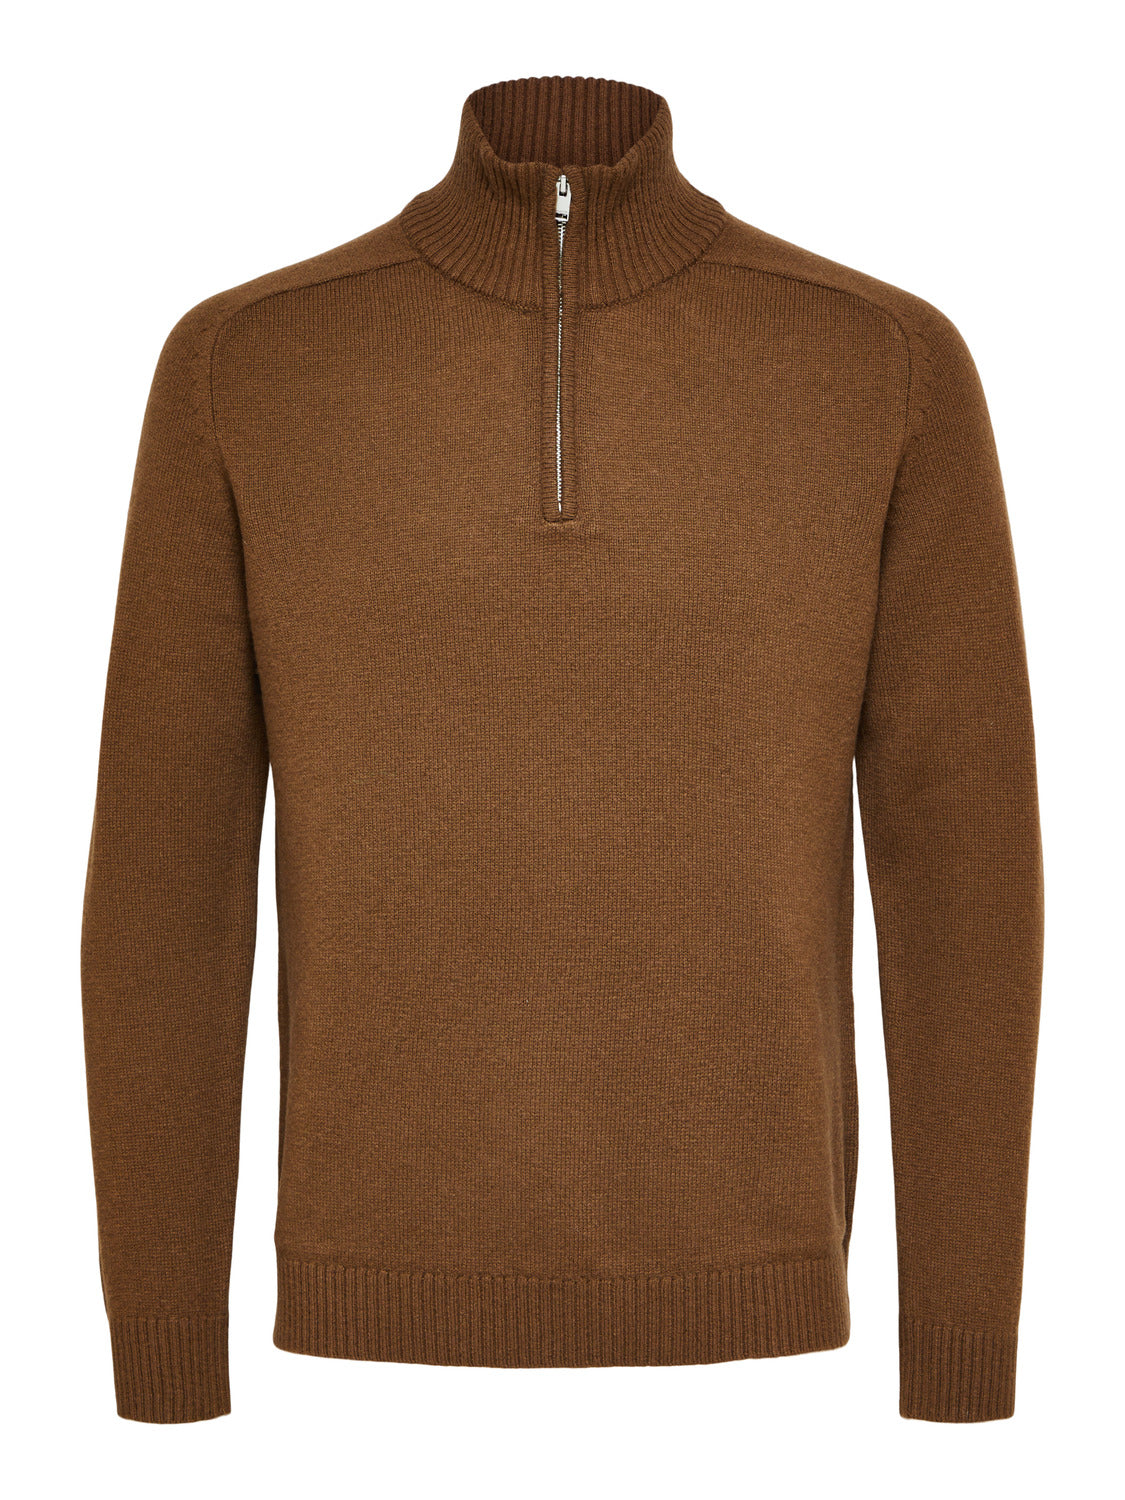 SELECTED HOMME - NEW COBAN Pullover - Coffee Lique�r